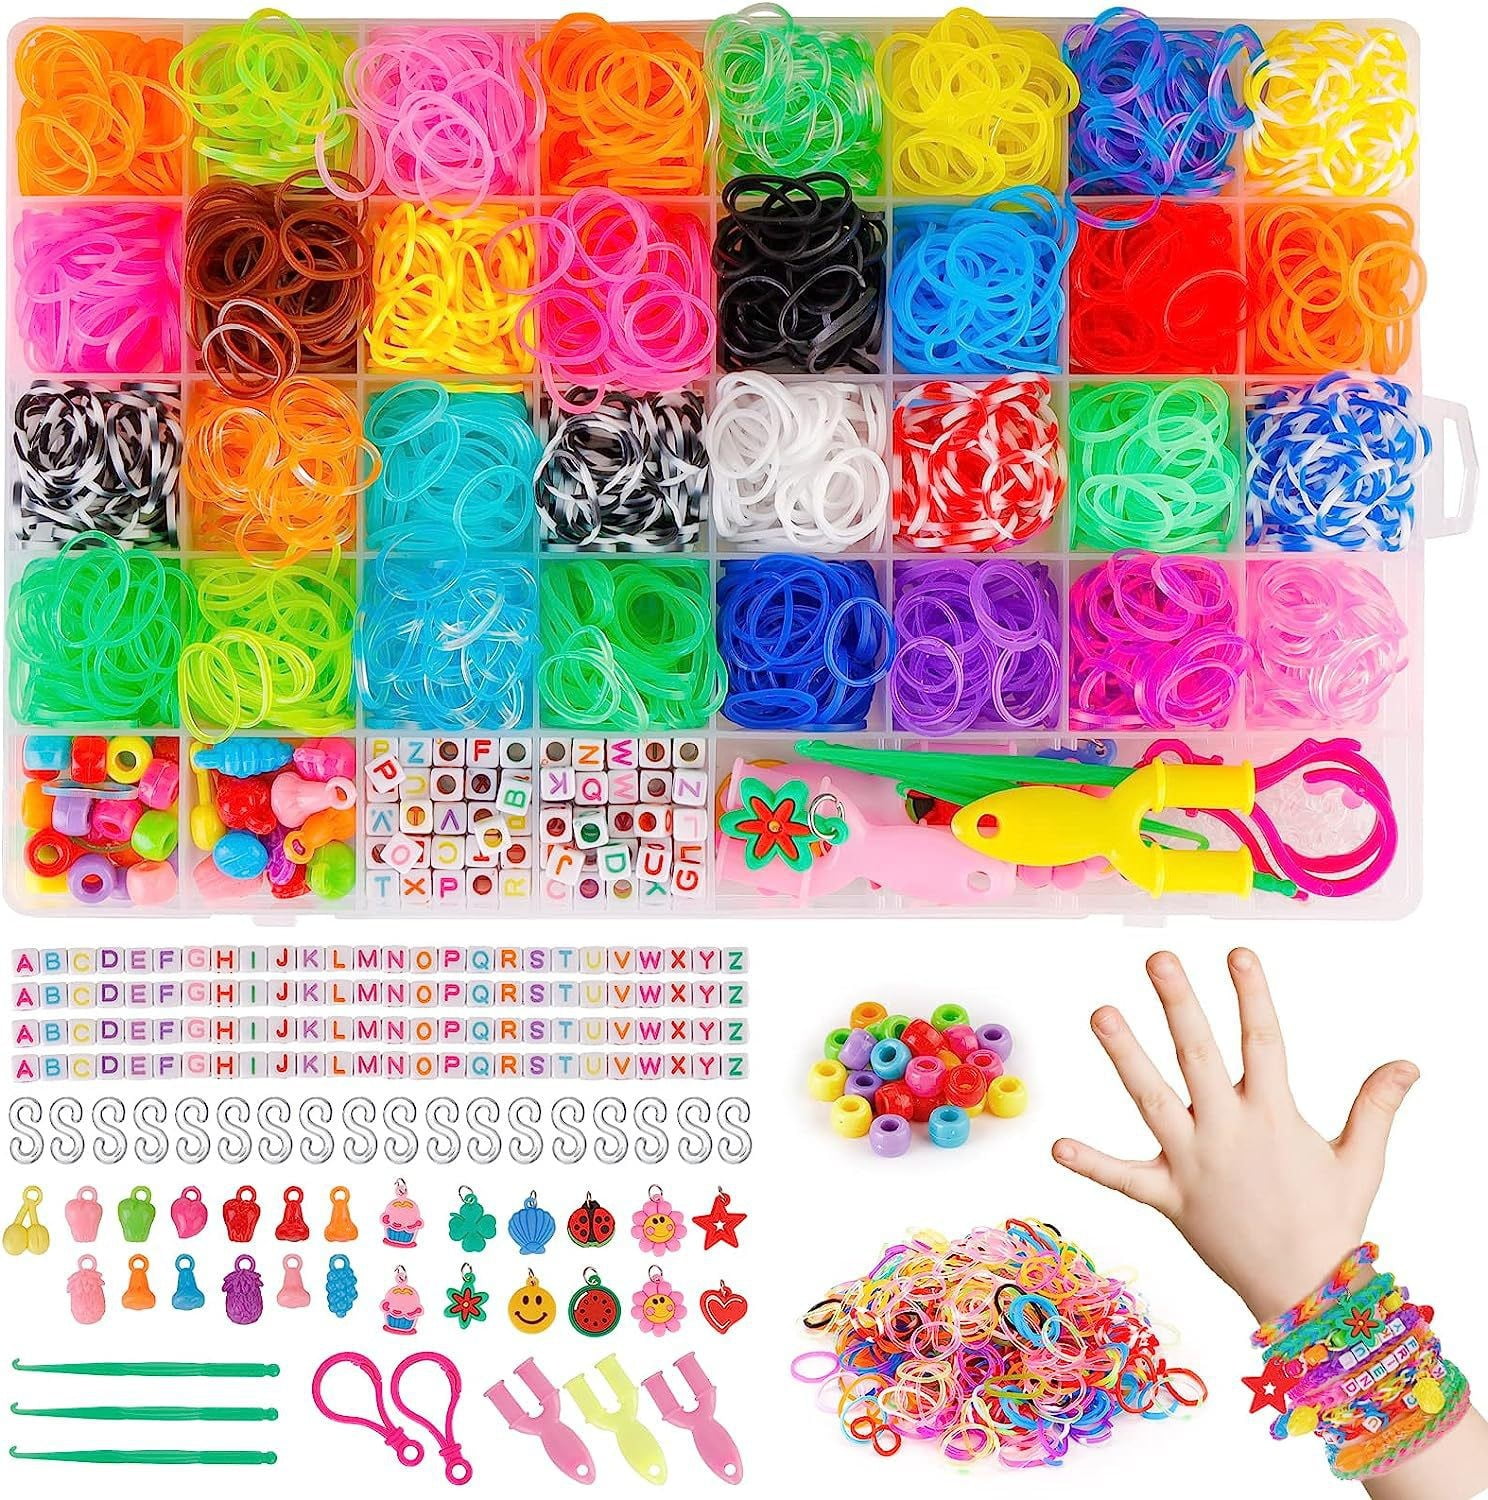 Black Friday Colorful Rubber Bands Making Kit - 2500+ Rubber Band Refill  Set In 32 Unique Colors With Other Accessories And Storage Box, Diy  Friendshi